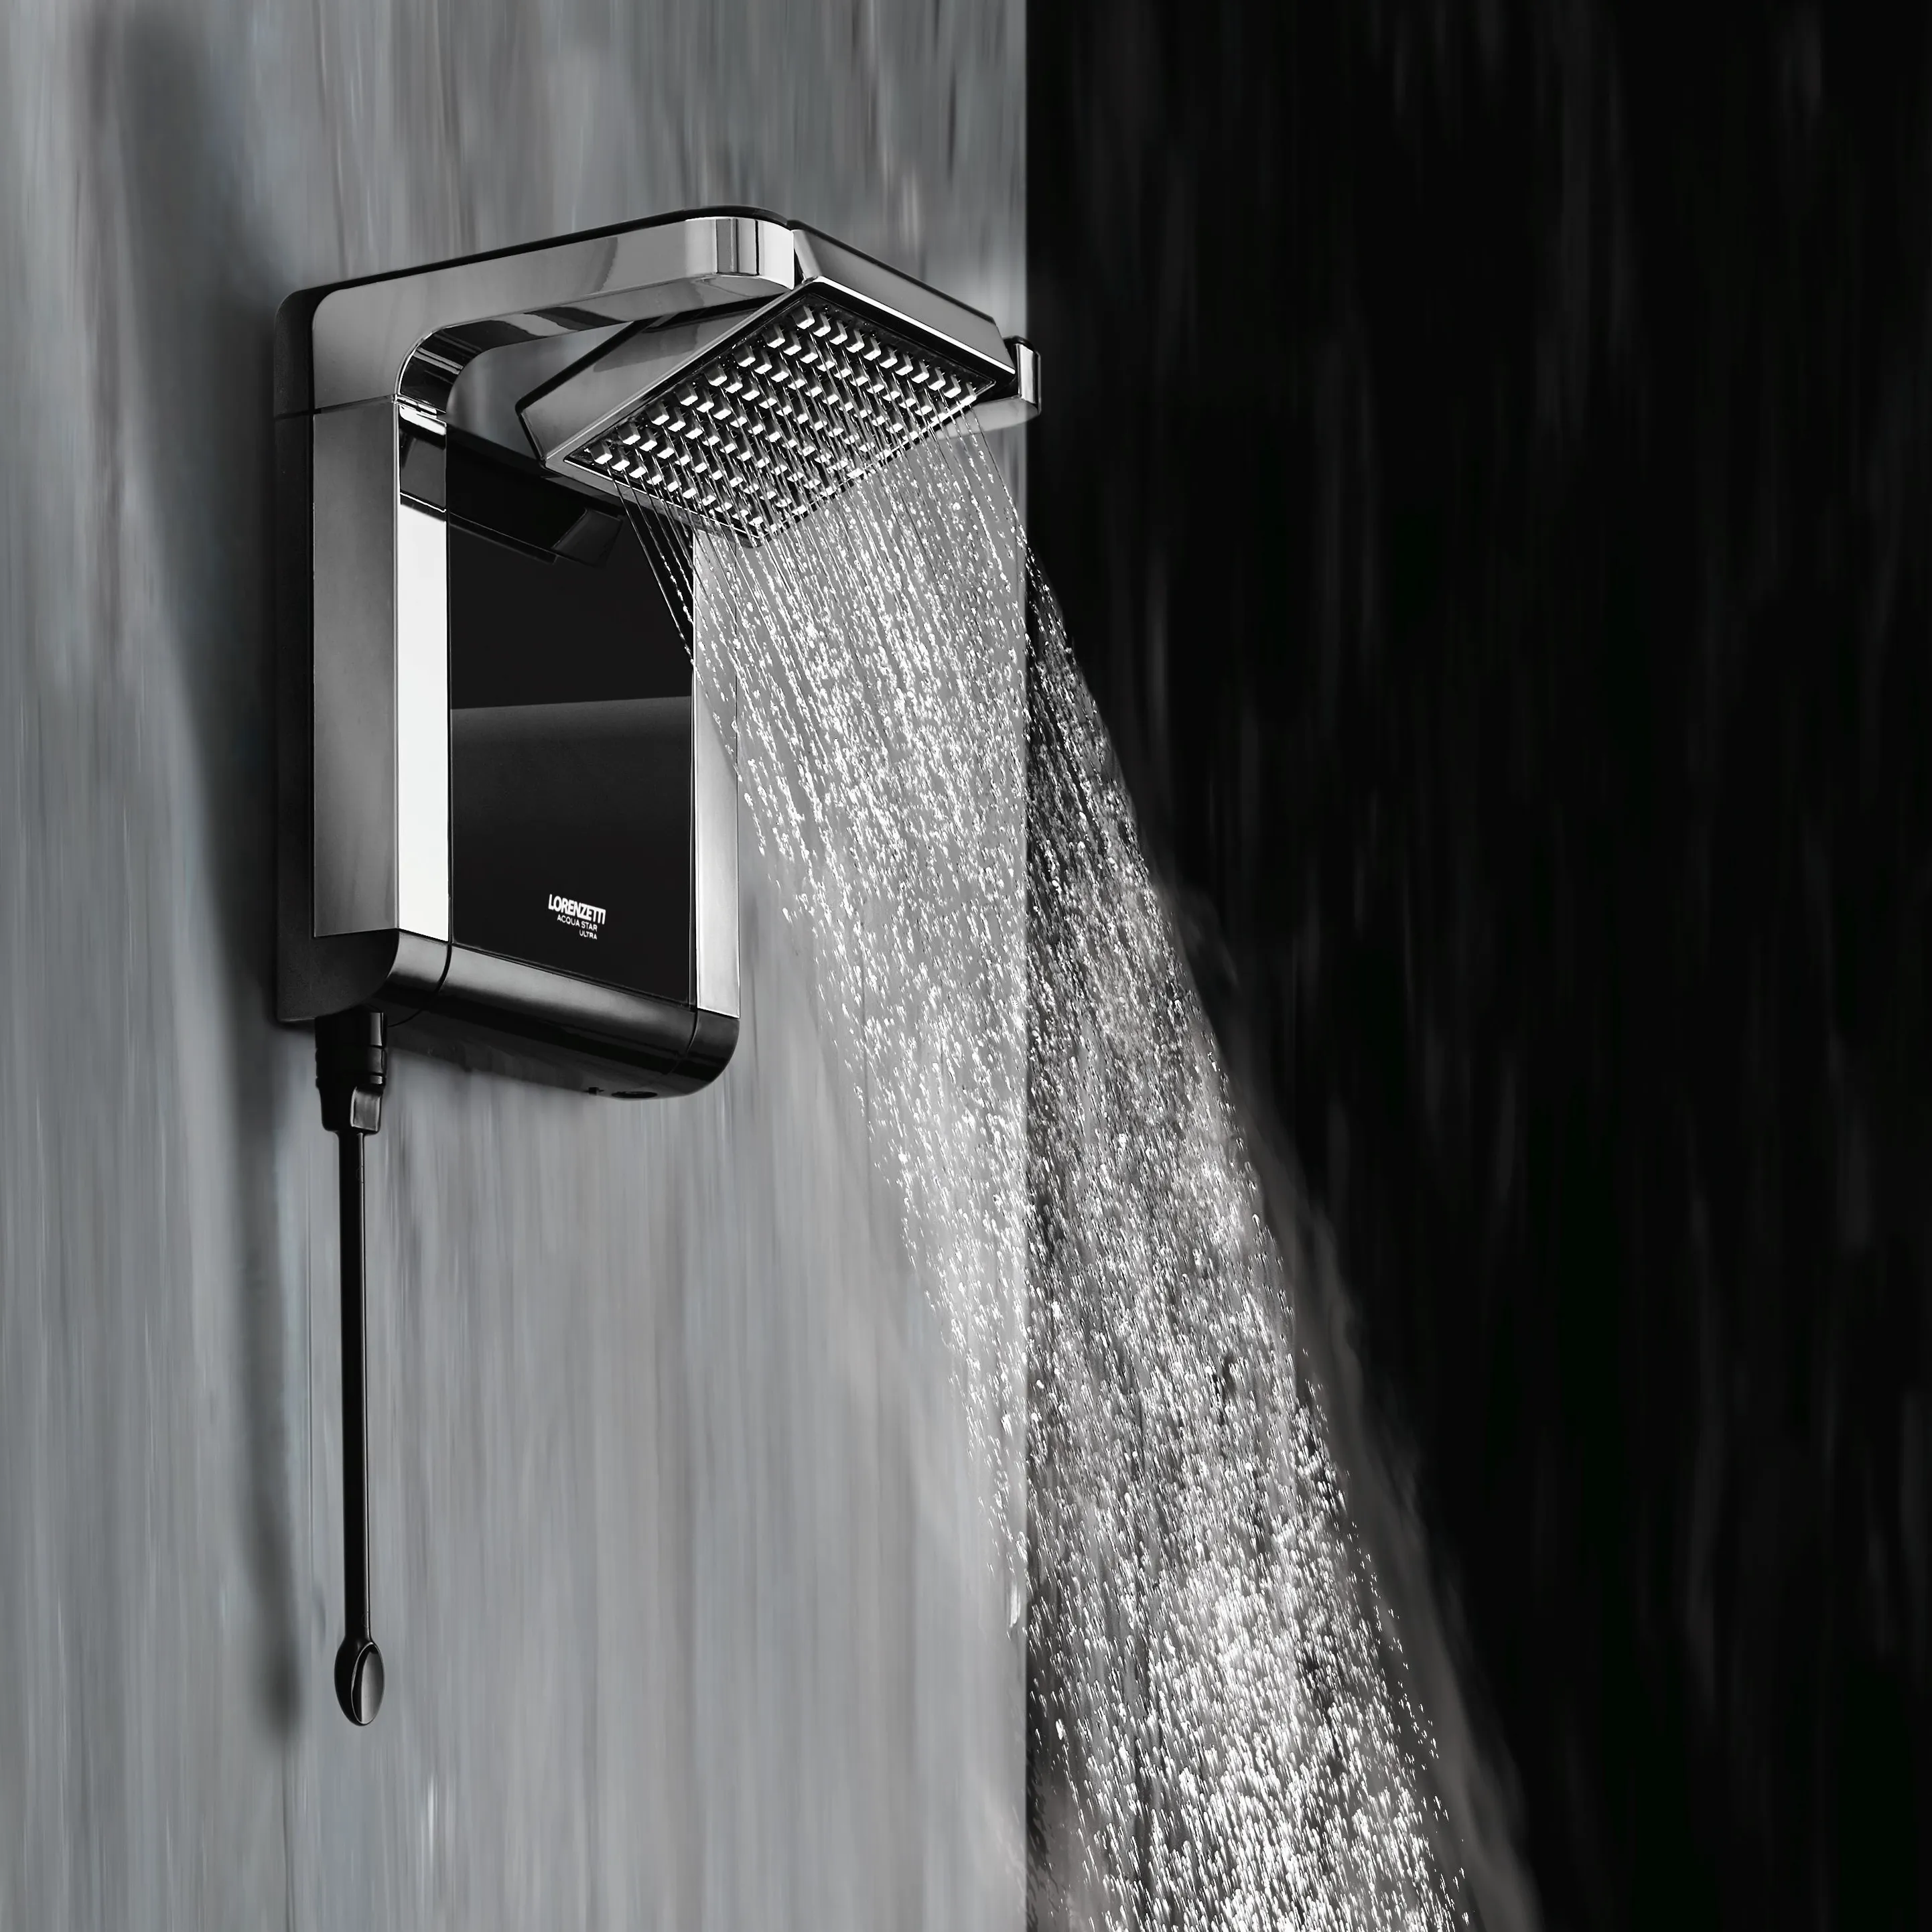 Acqua Star Ultra - Electric Shower Heater - Lorenzetti Instantaneous Water Heating - Awarded Design - Tankless Water Heater